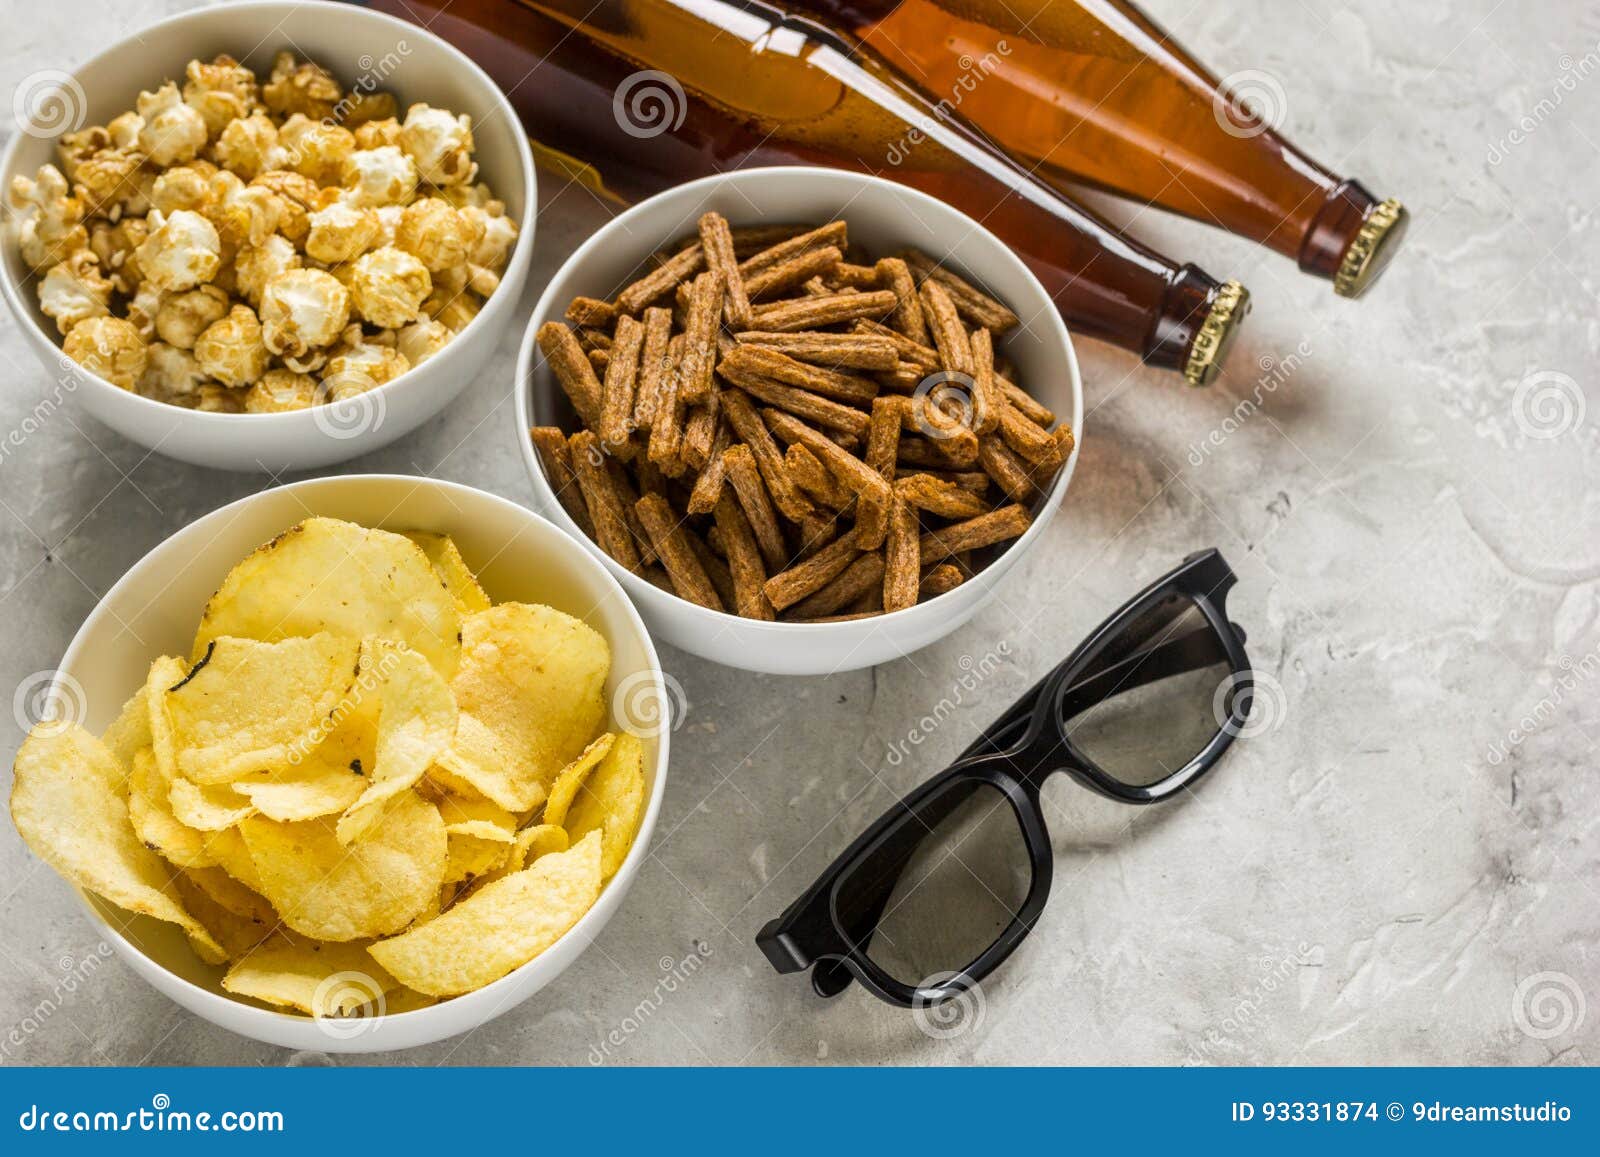 Verrassend Glasses, Snacks, Beer For Whatchig Film On Stone Background Stock XJ-09